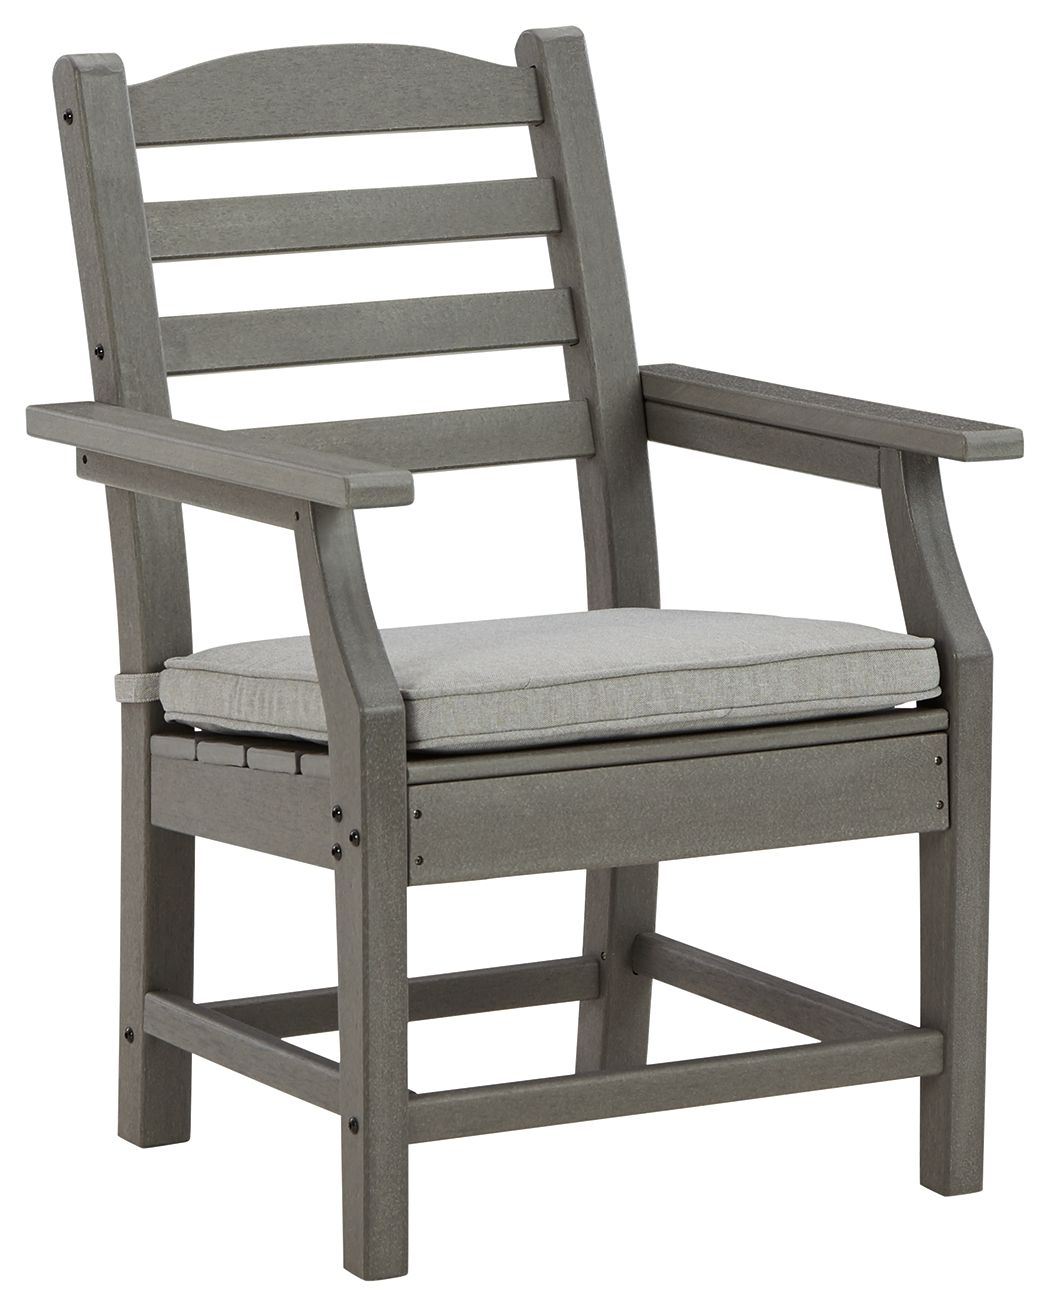 Visola - Gray - Arm Chair With Cushion (Set of 2)